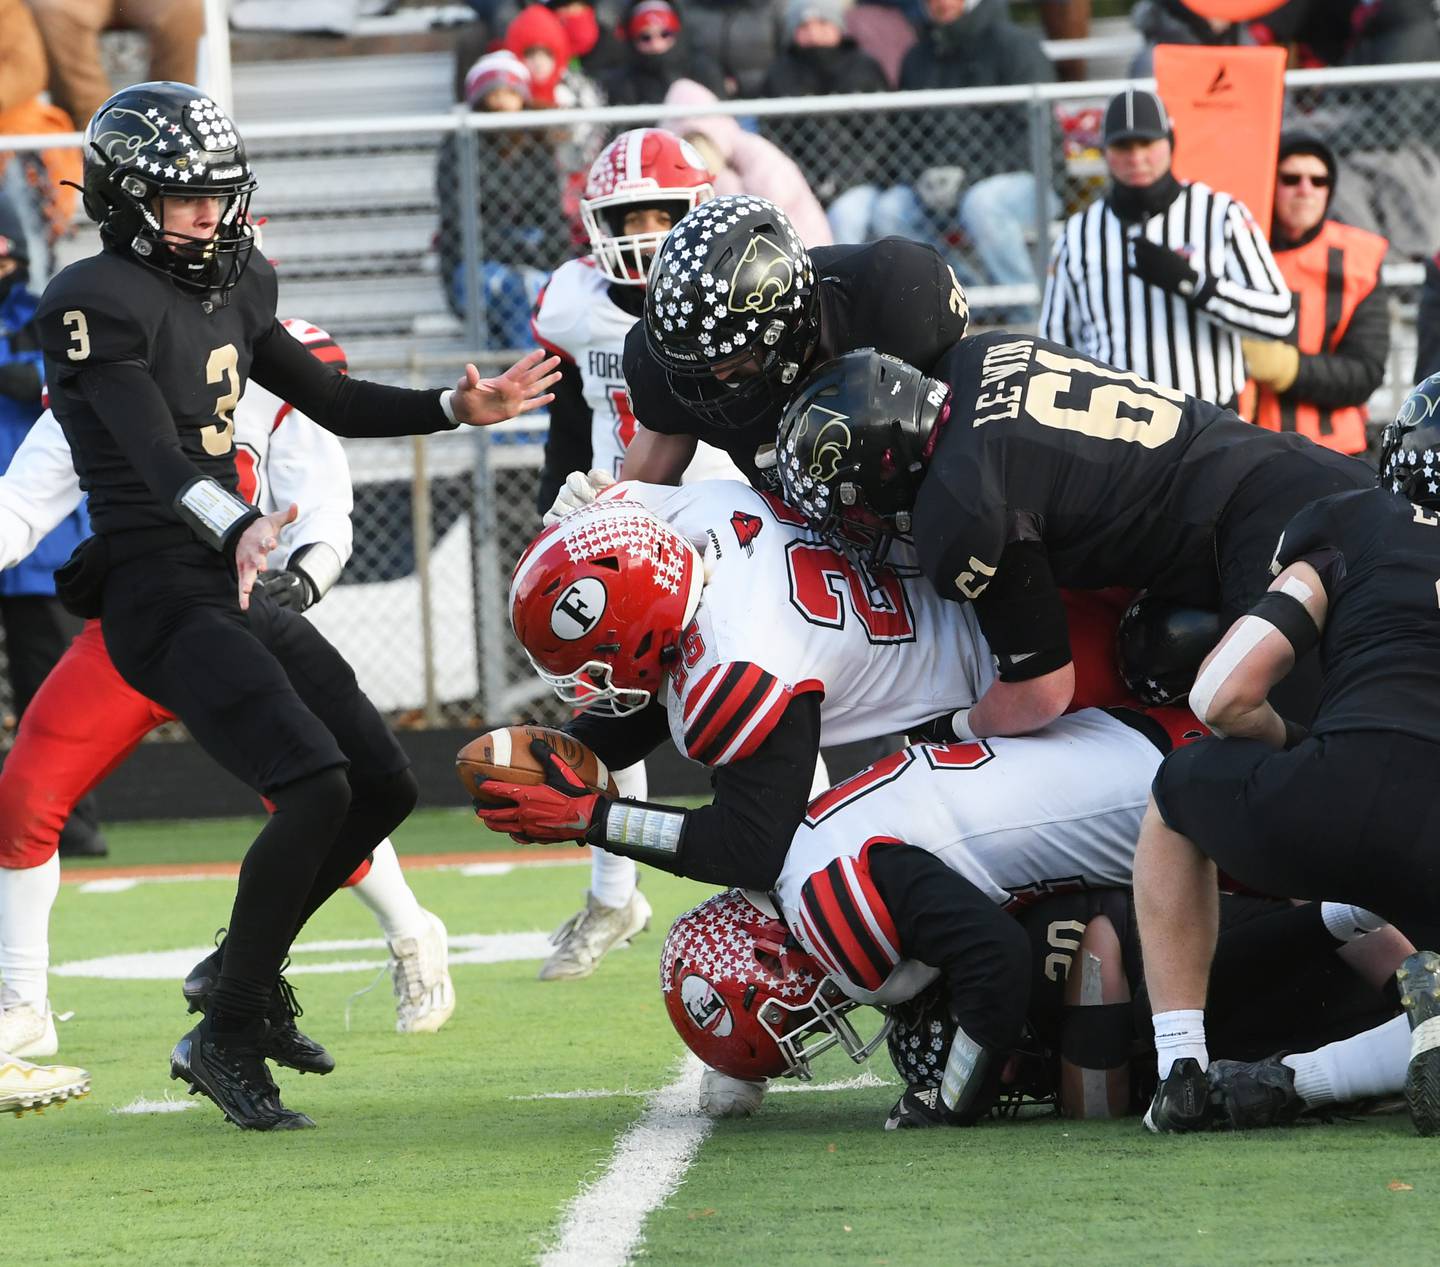 Forreston's Johnathen Kobler fights for yards as Lena-Winslow defenders pile on during first half action at the 1A semifinal in Freeport on Saturday, Nov. 19. The Panthers ended the Cardinals season willing the game 38-16 to advance to the state championship game next Friday in Champaign.